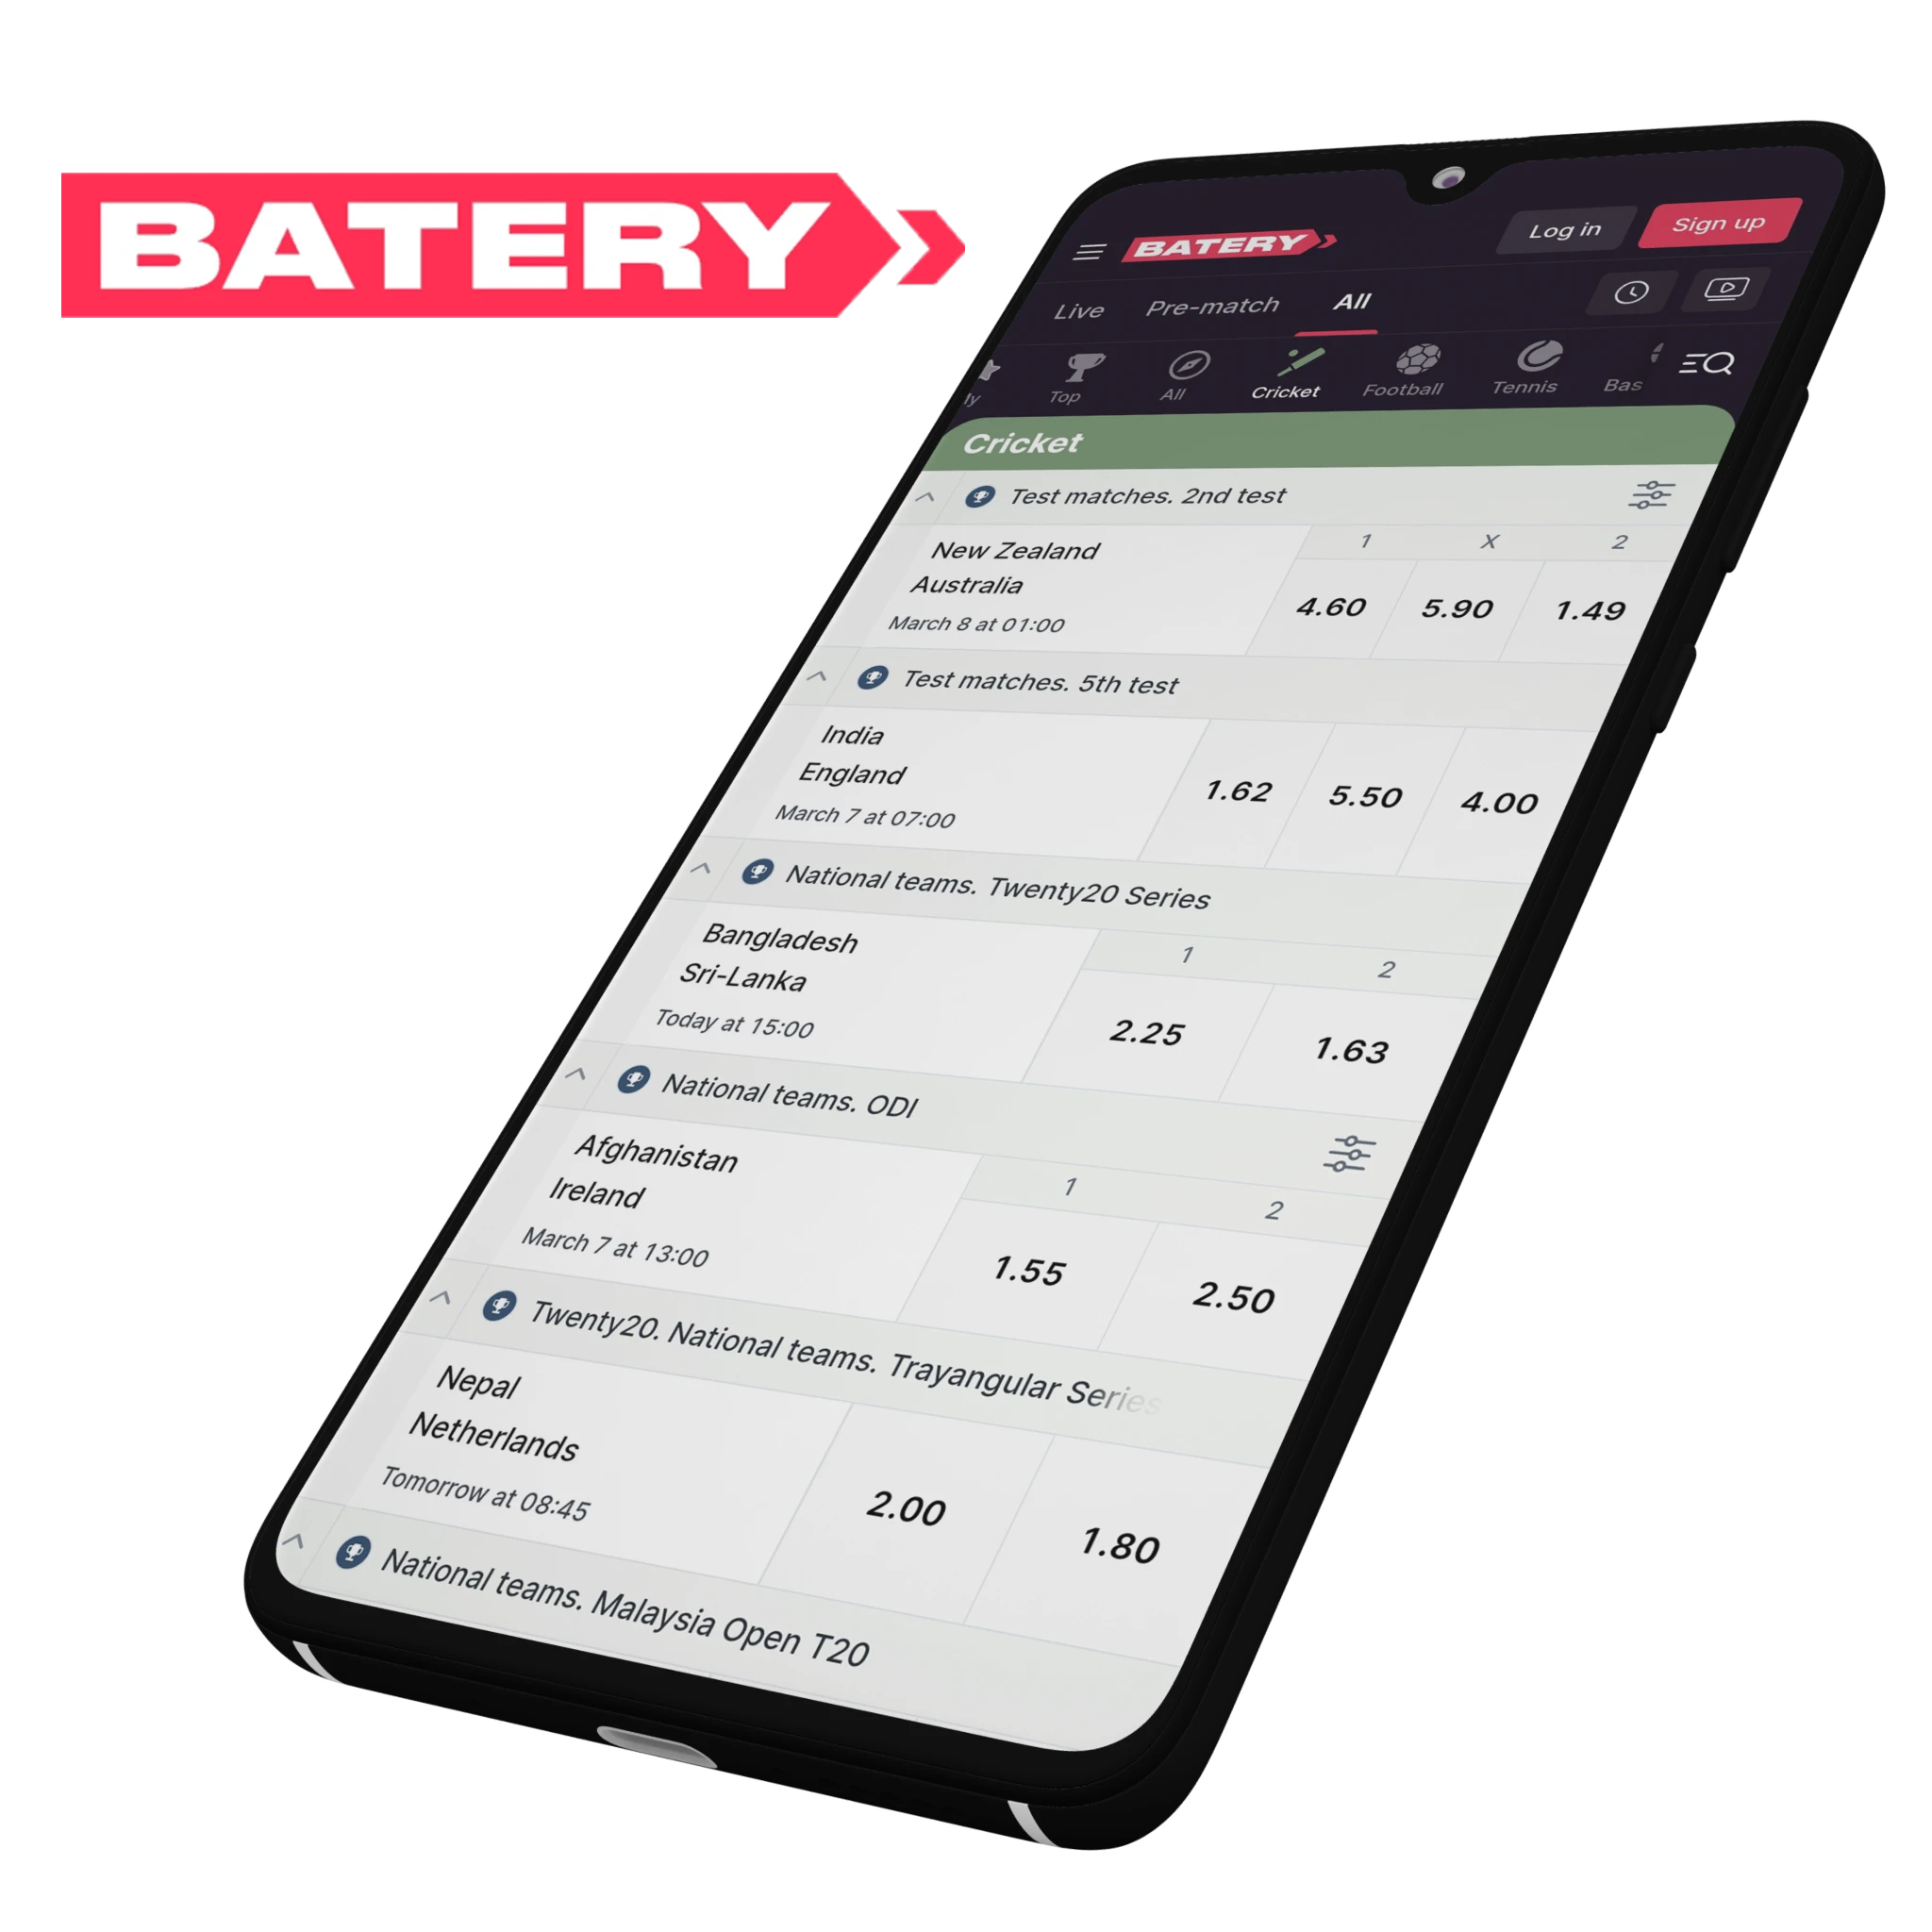 Batery app provides a lot of deposit and withdrawal methods that are commonly used in India.